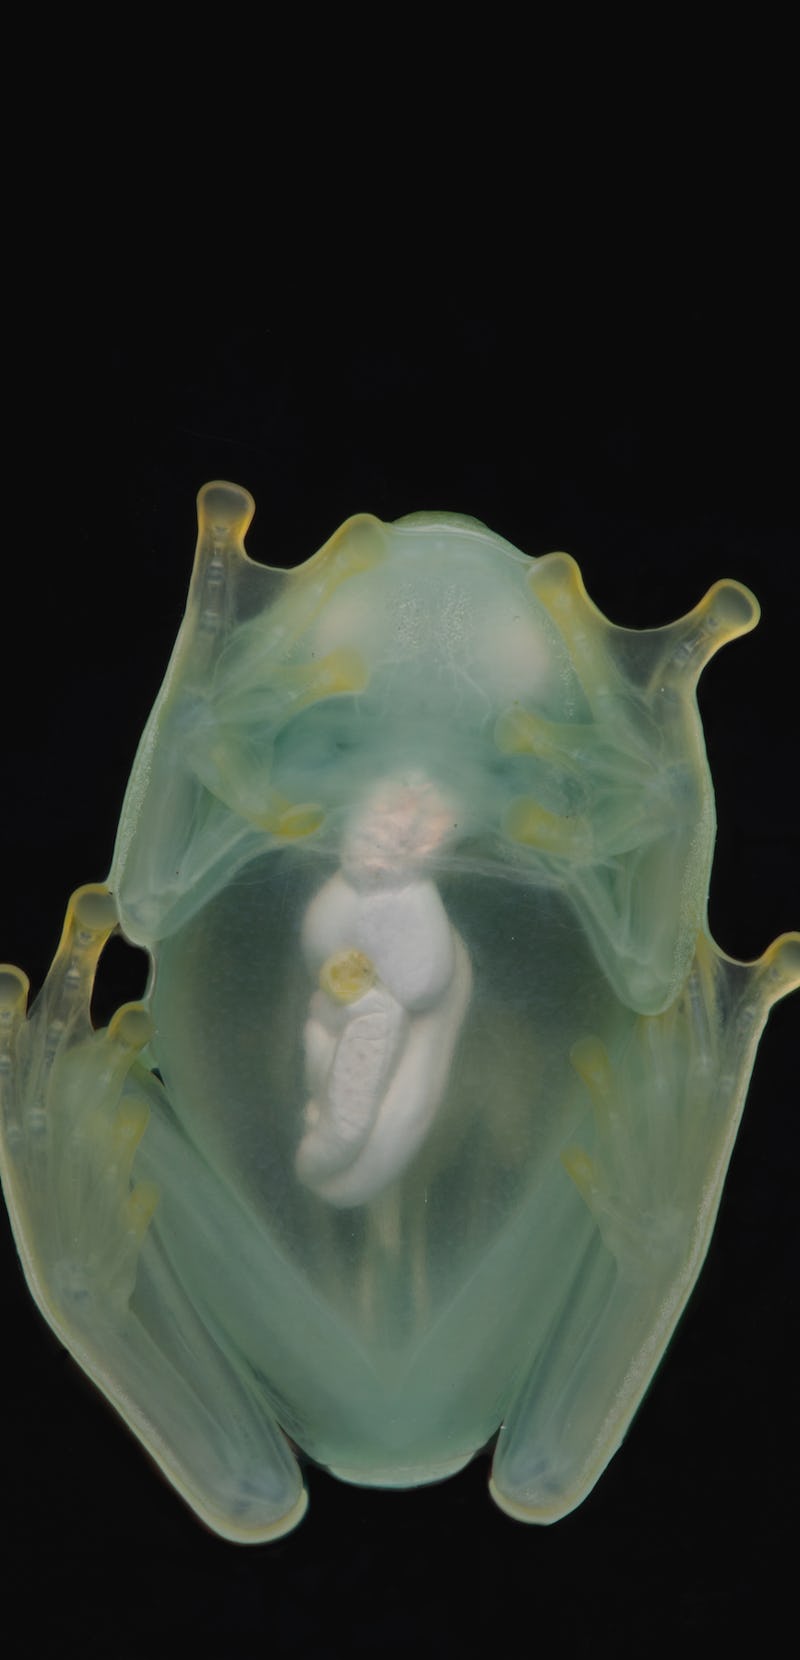 A male glassfrog photographed from below using a flash, showing its transparency.